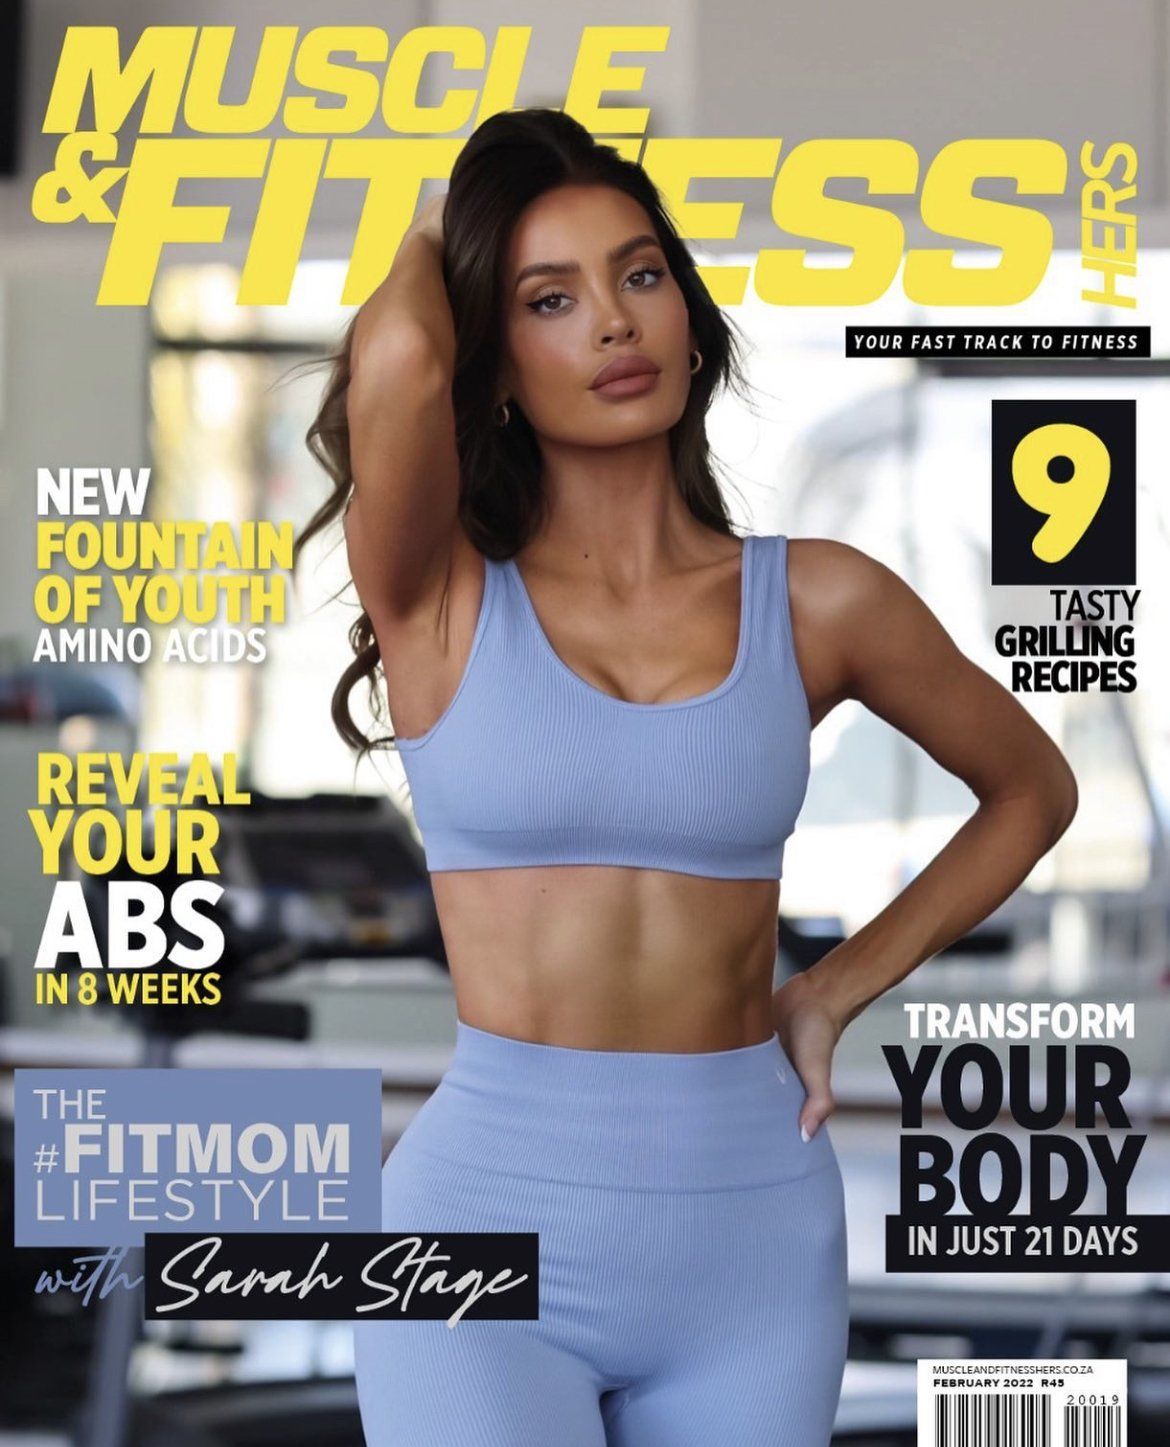 MUSULE & FITNESS HERS MAGAZINE